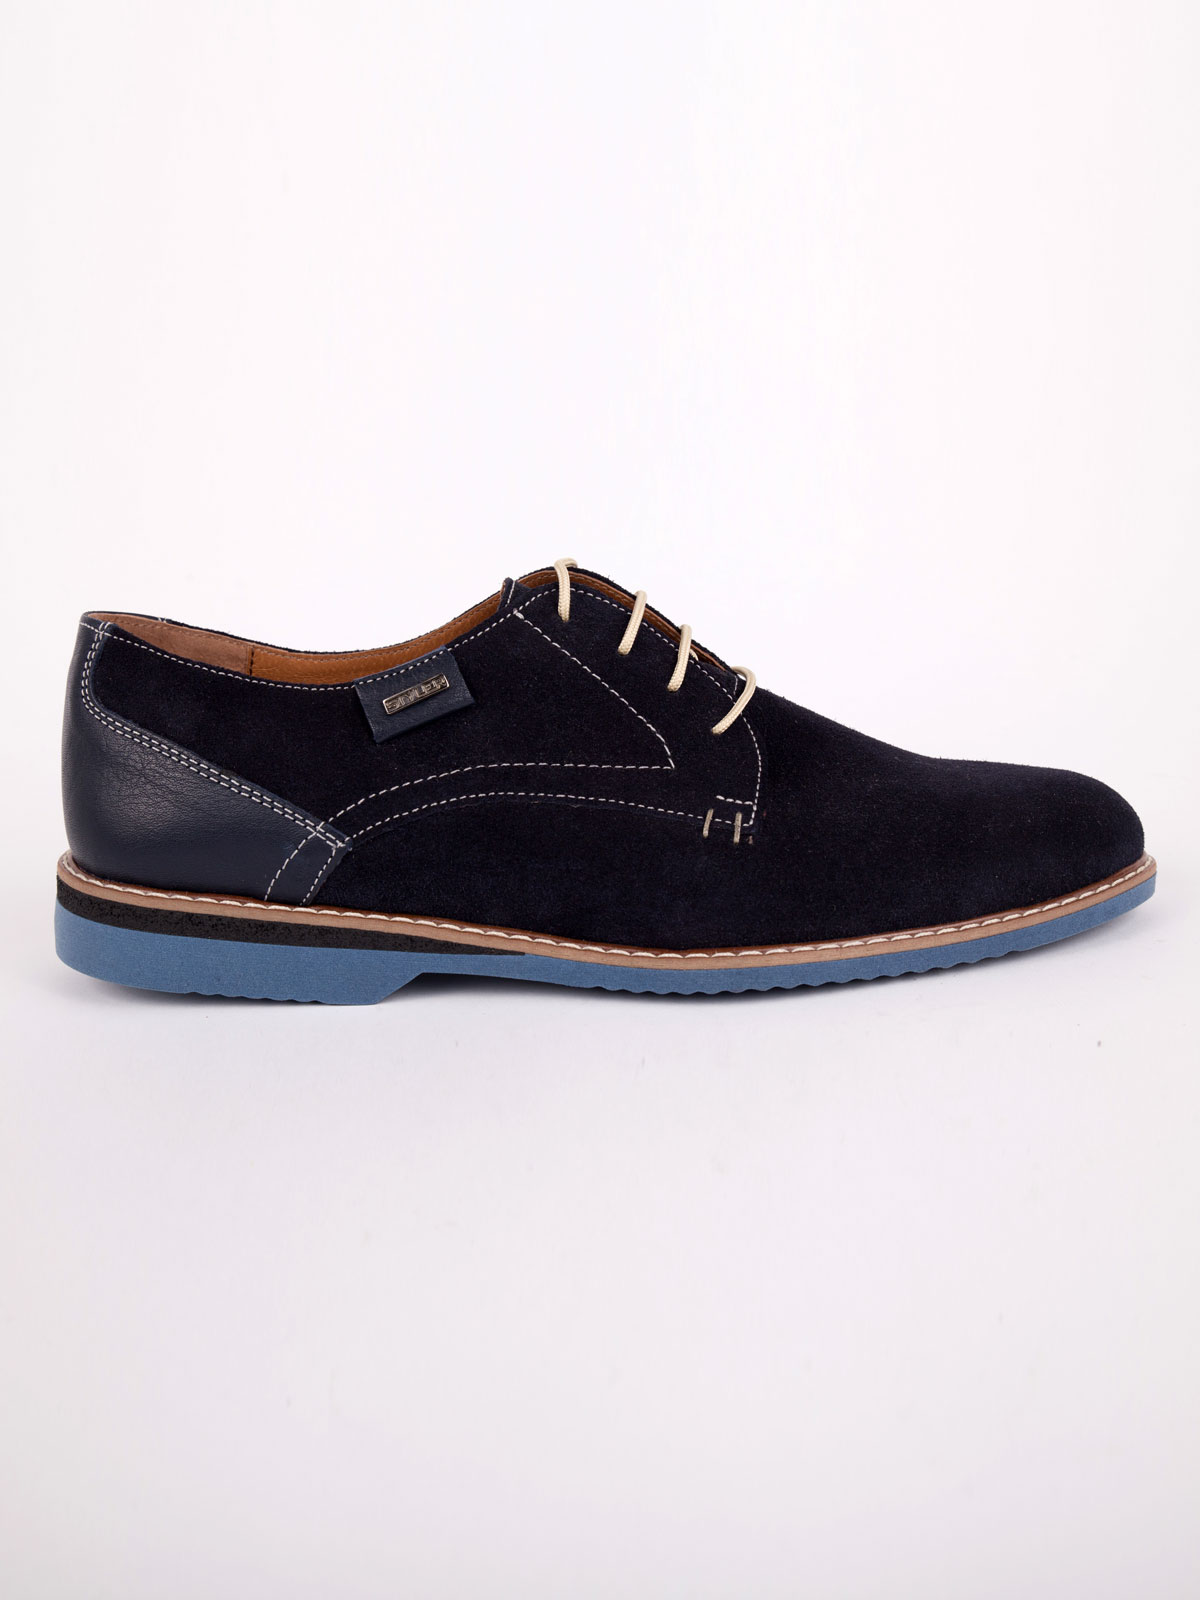 Suede shoes with leather accent - 81077 - € 83.24 img4